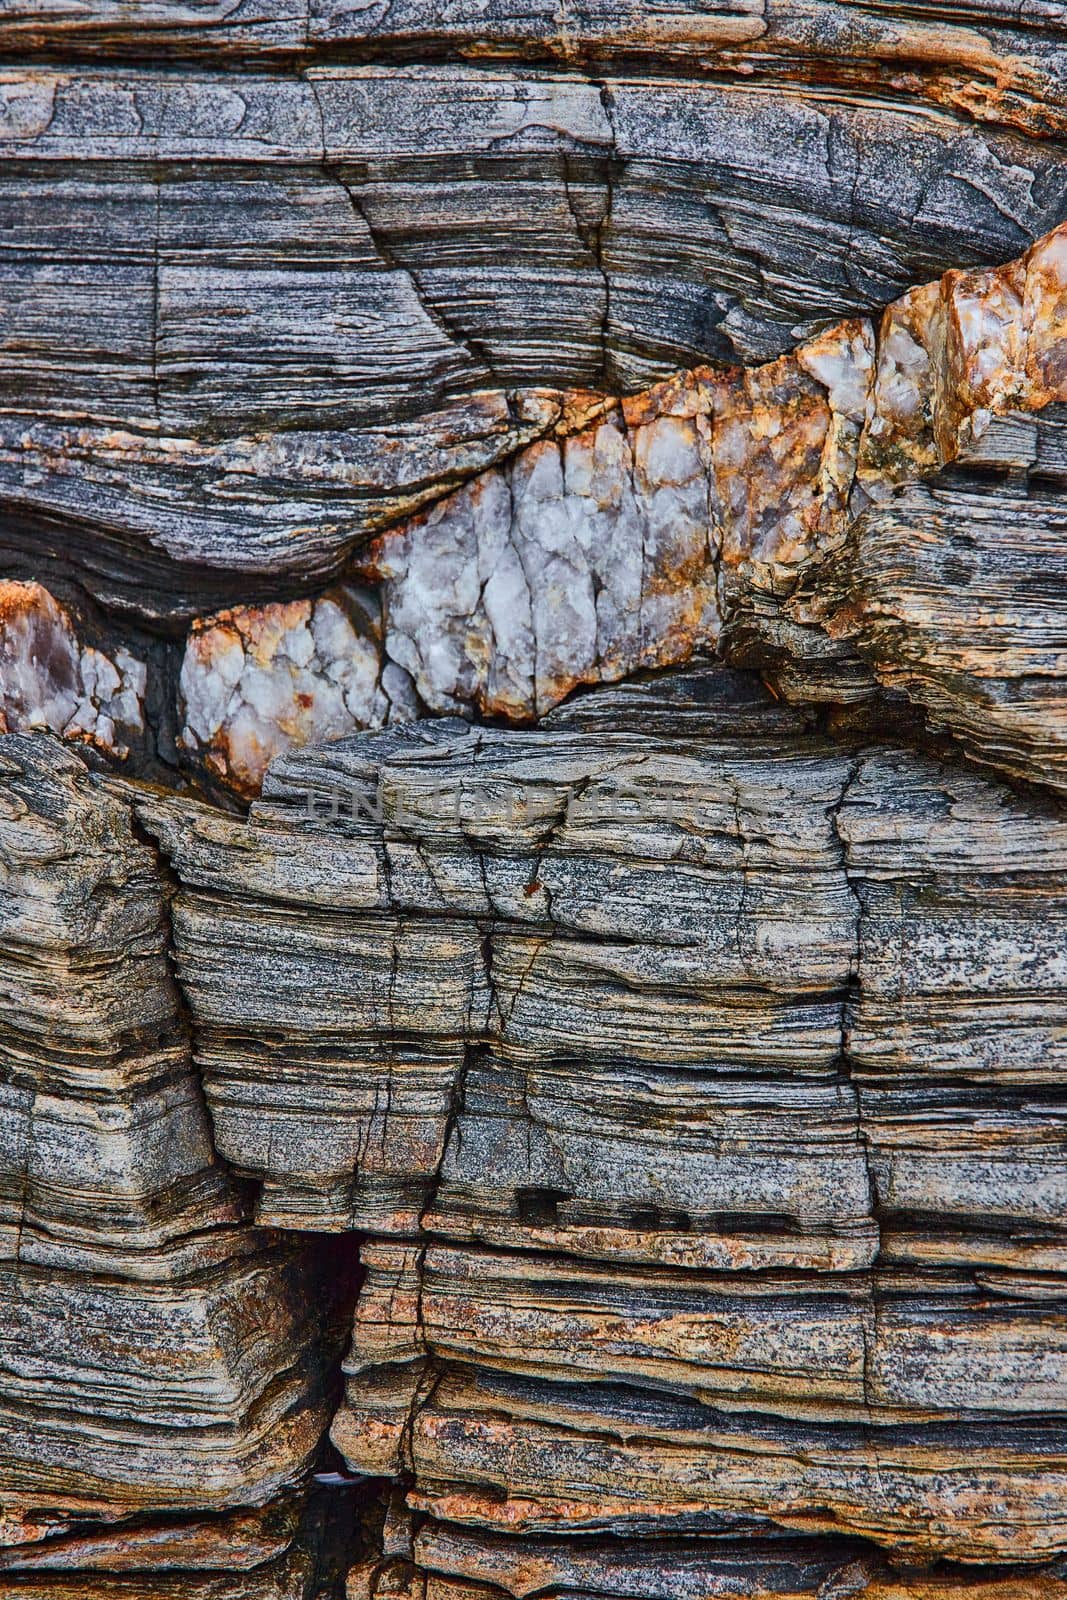 Image of Maine coast rock like petrified wood with Quartz vein minerals going through